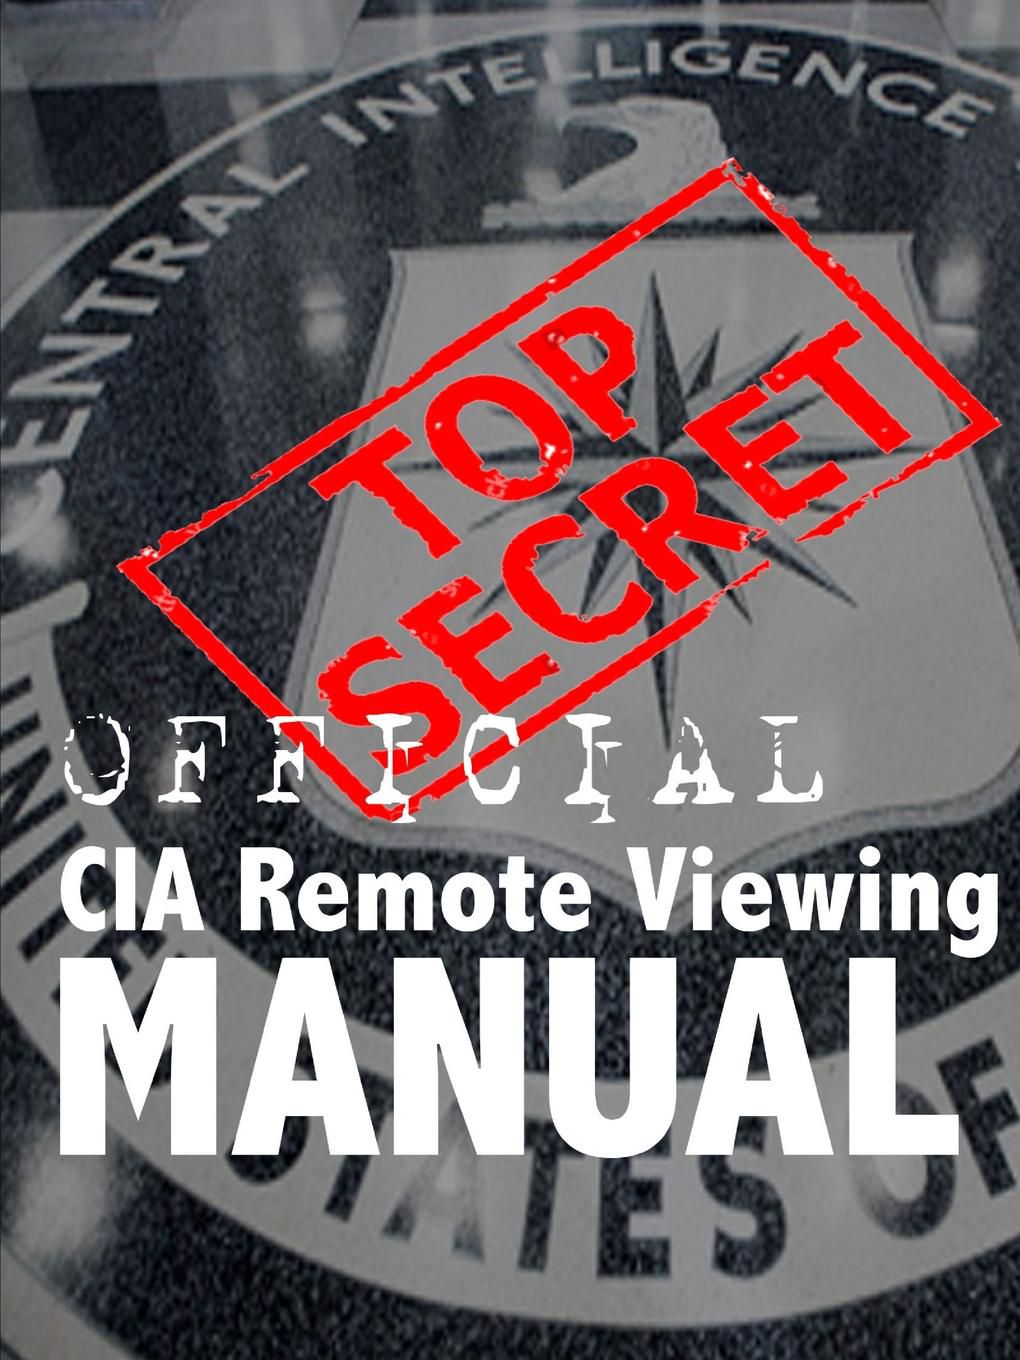 Cia Remote Viewing Manual Buy Cia Remote Viewing Manual Online at Low